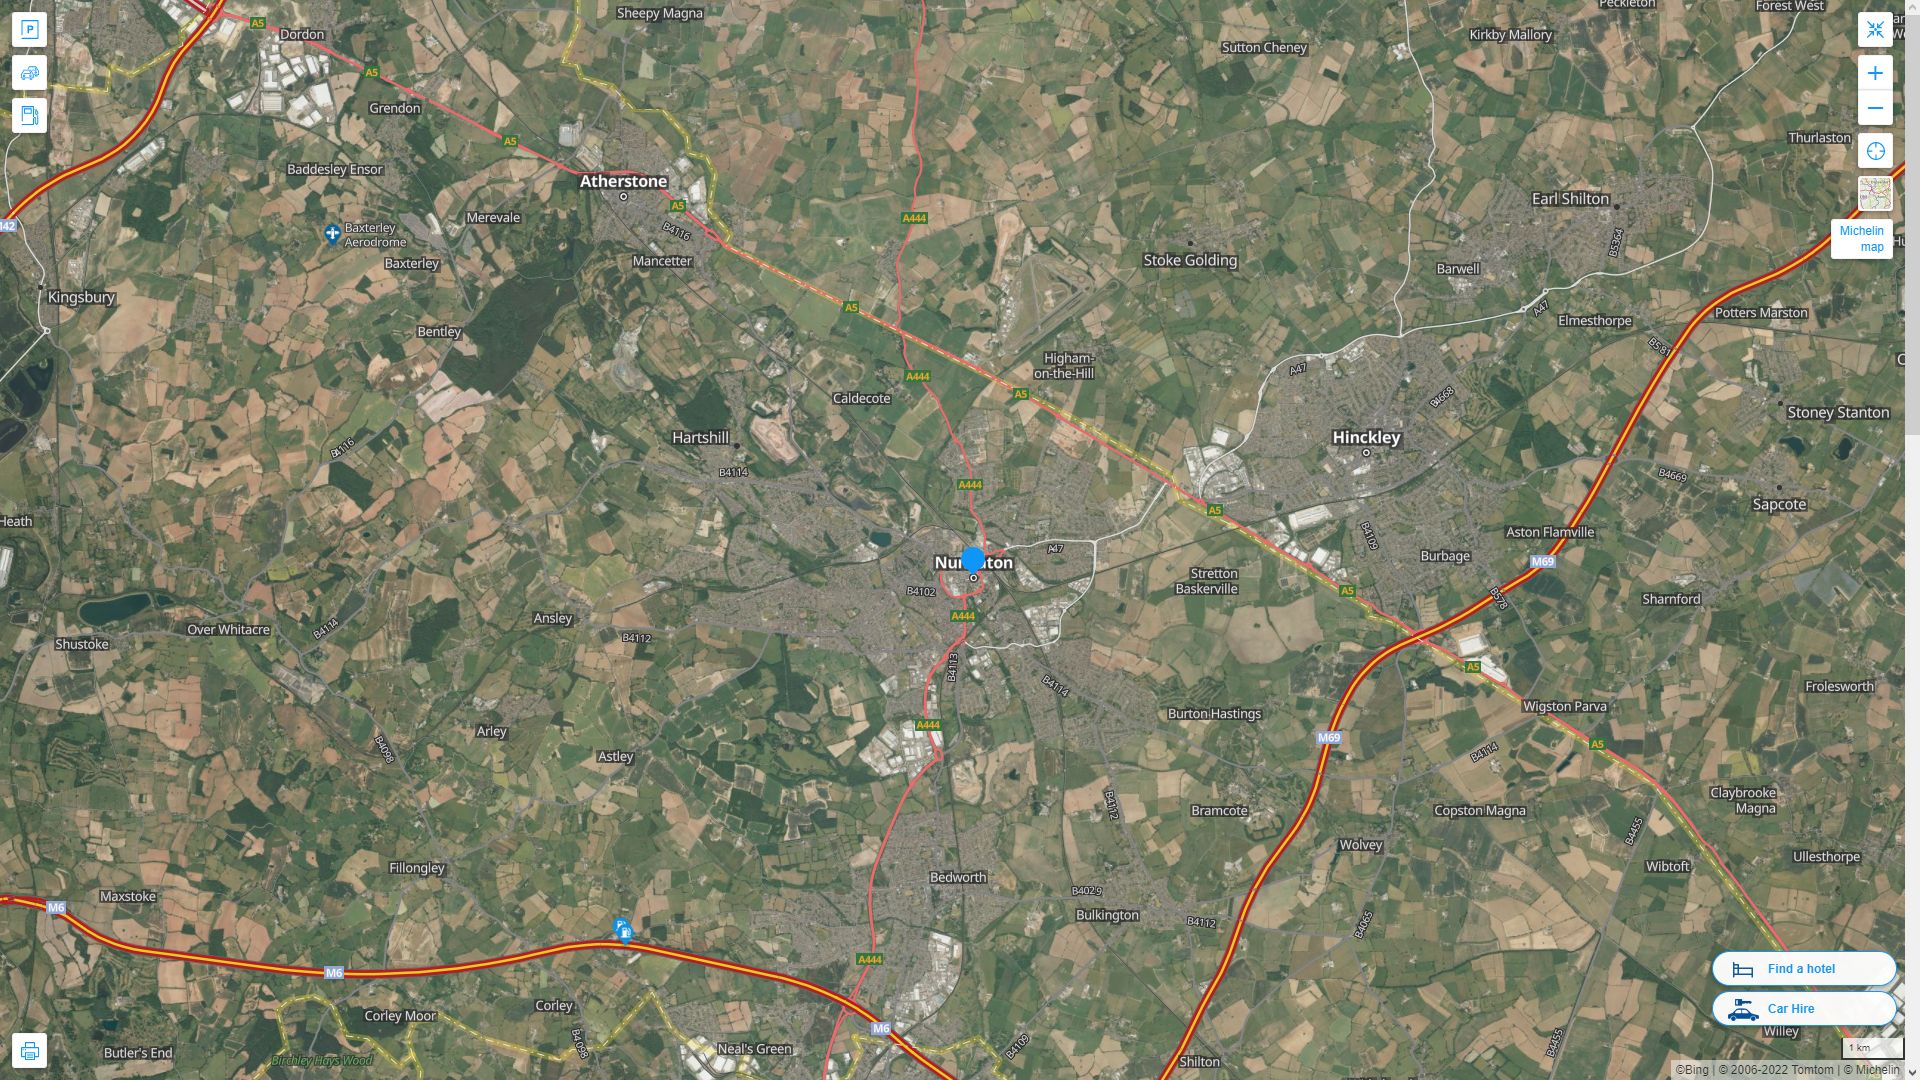 Nuneaton Highway and Road Map with Satellite View